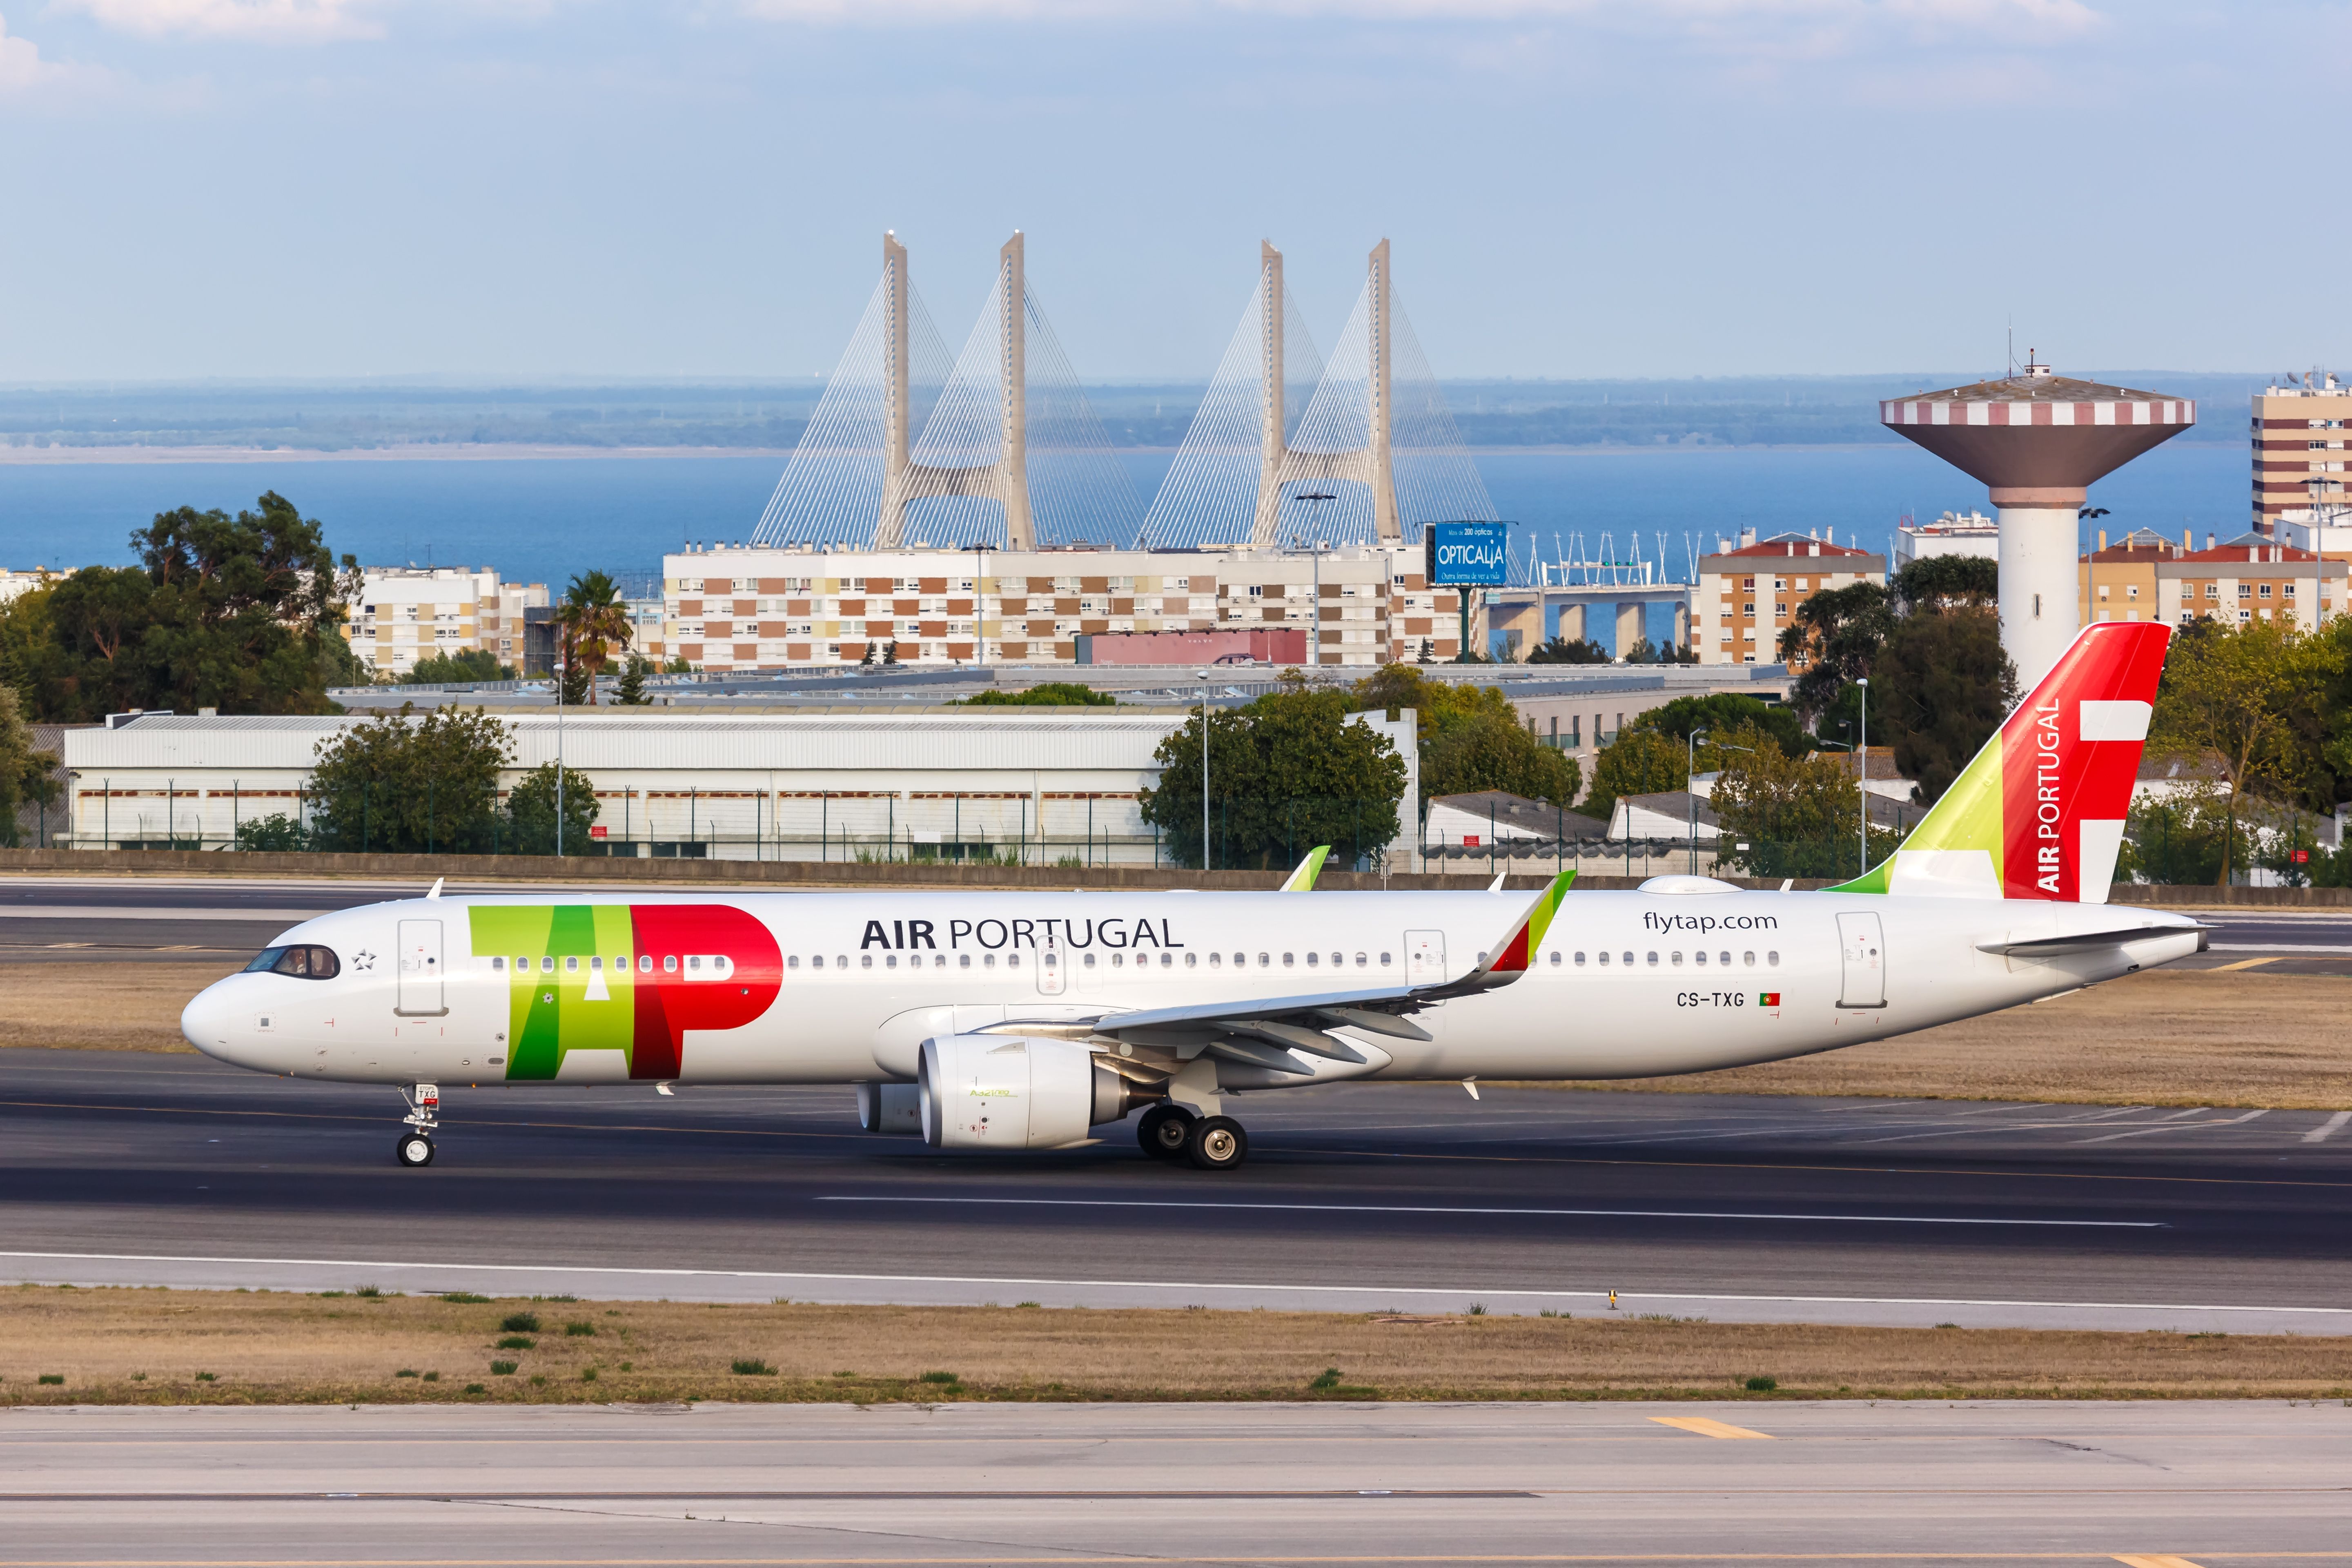 TAP Air Portugal Airbus A321neo airplane at Lisbon airport (LIS) in Portugal in front of the 